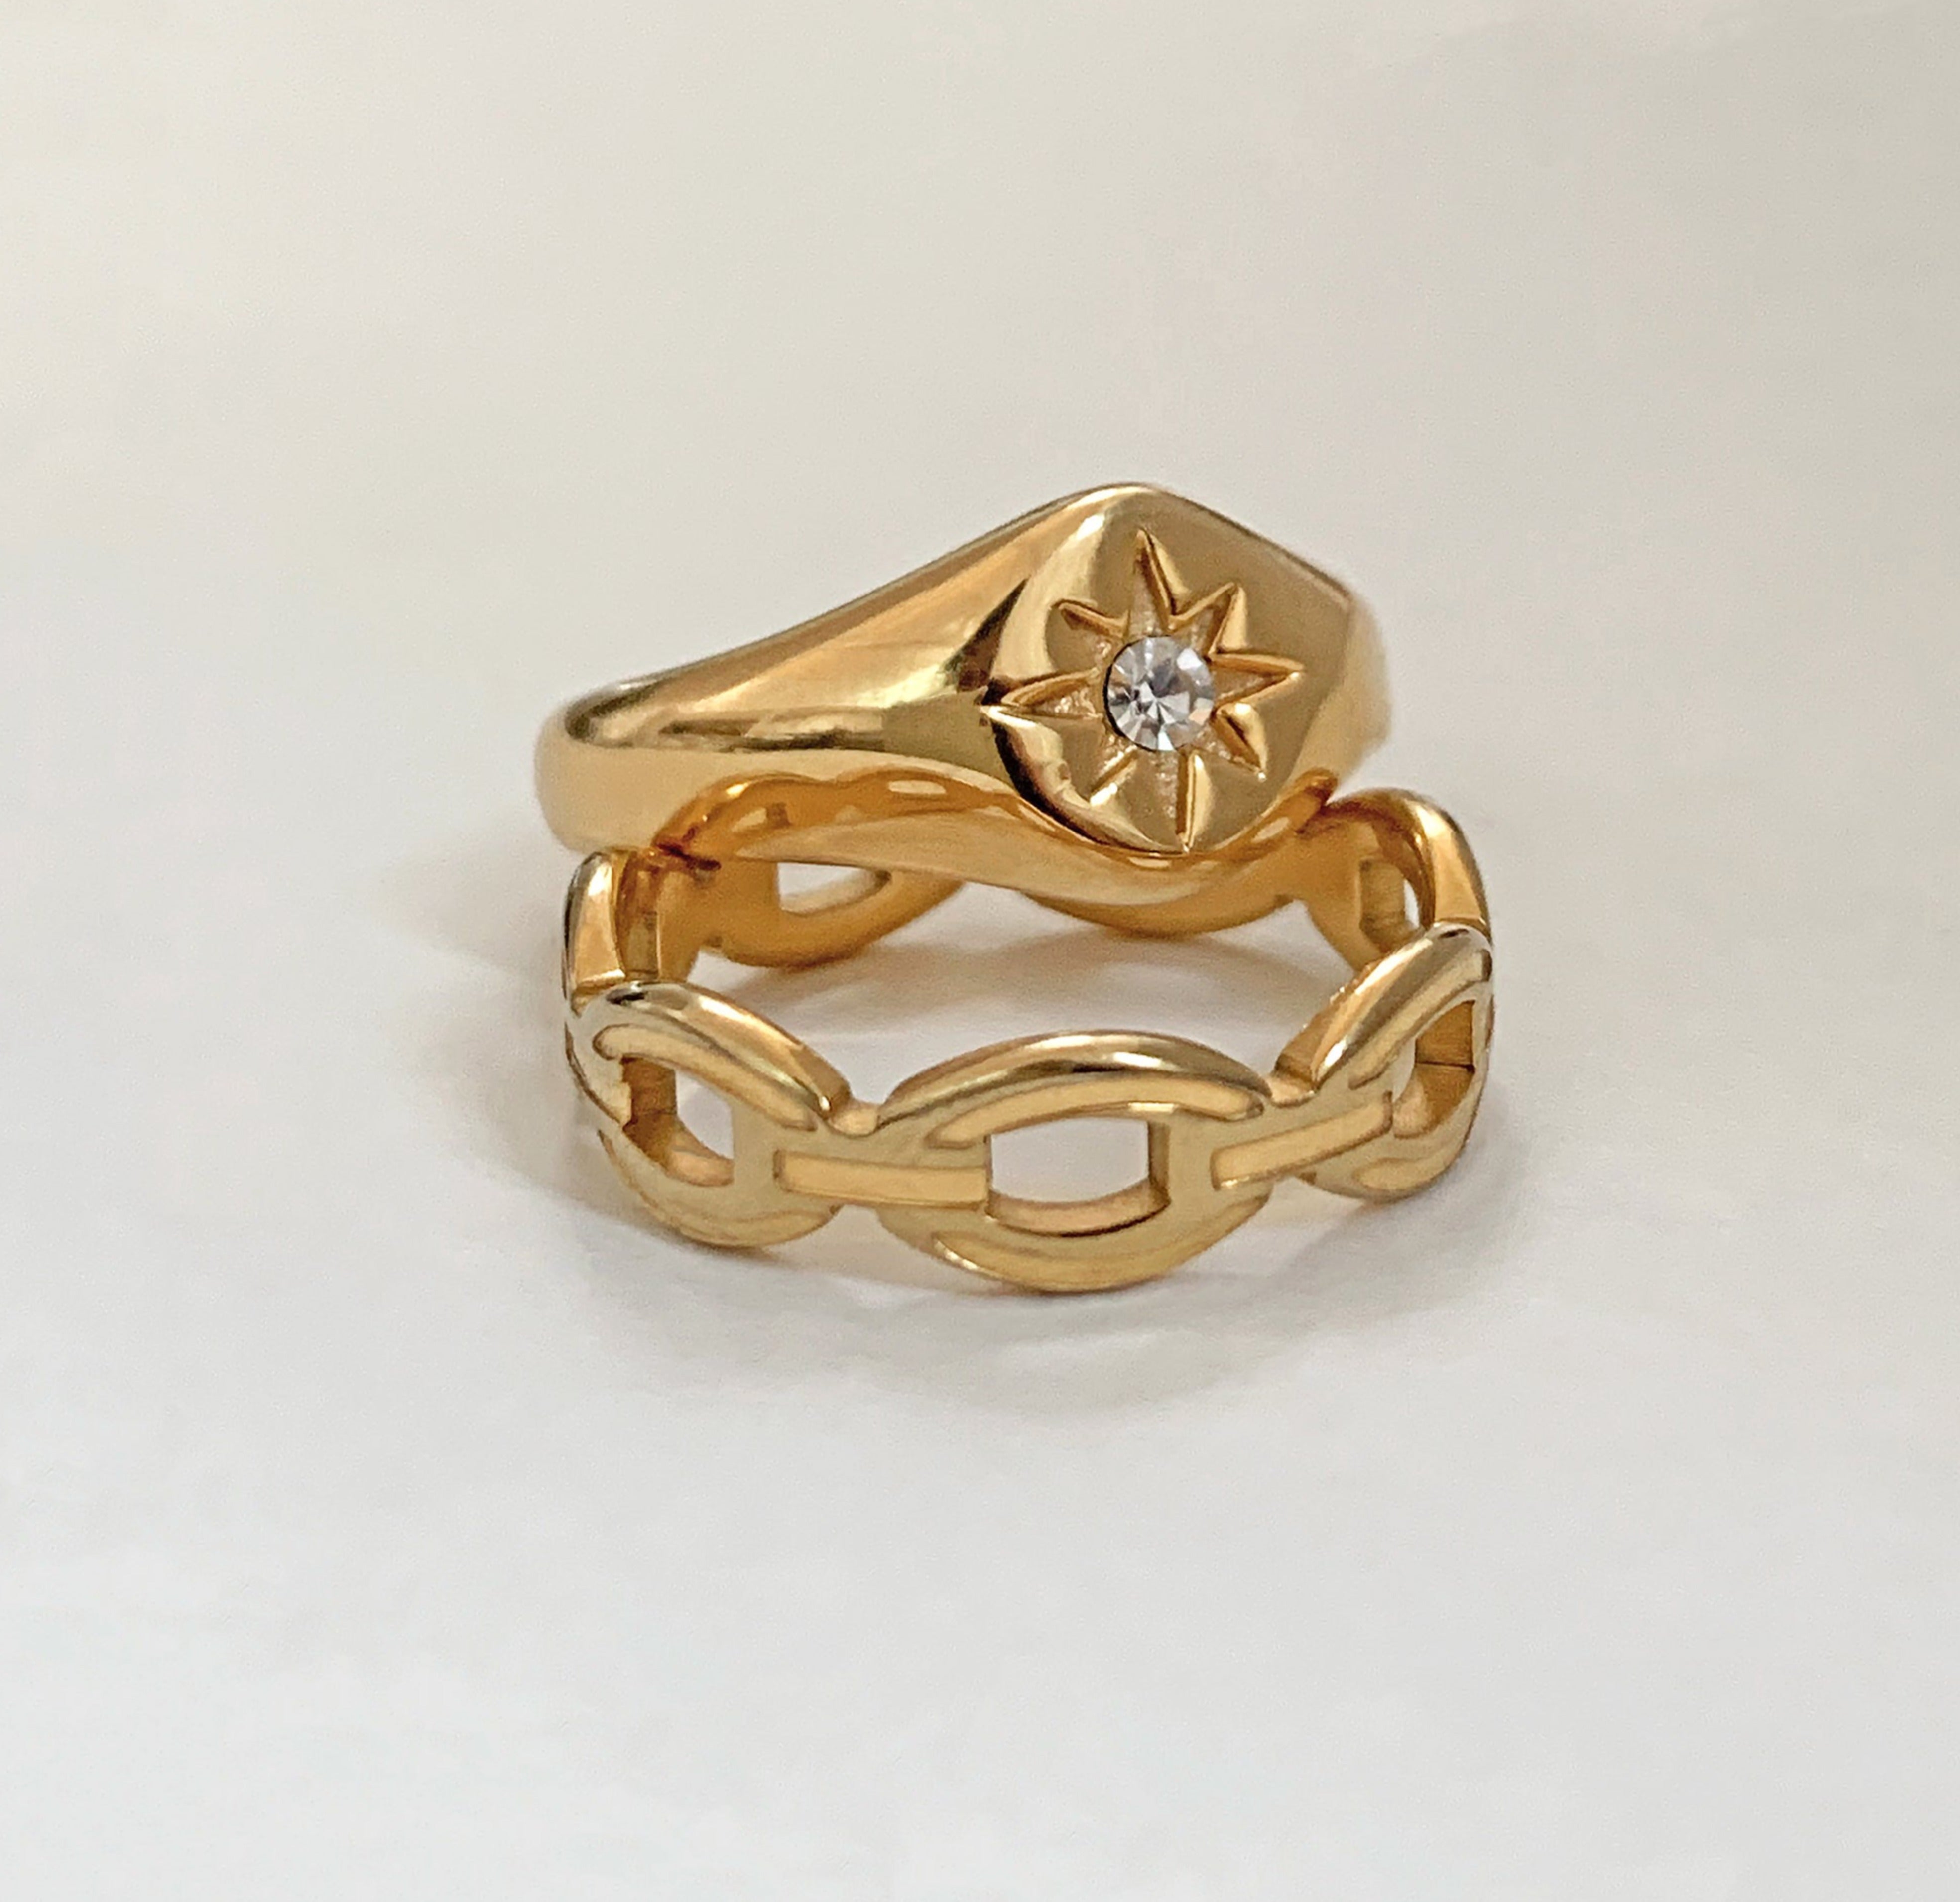 Dylan gold link chain ring paired with August gold starburst sight ring, watereproof jewelry